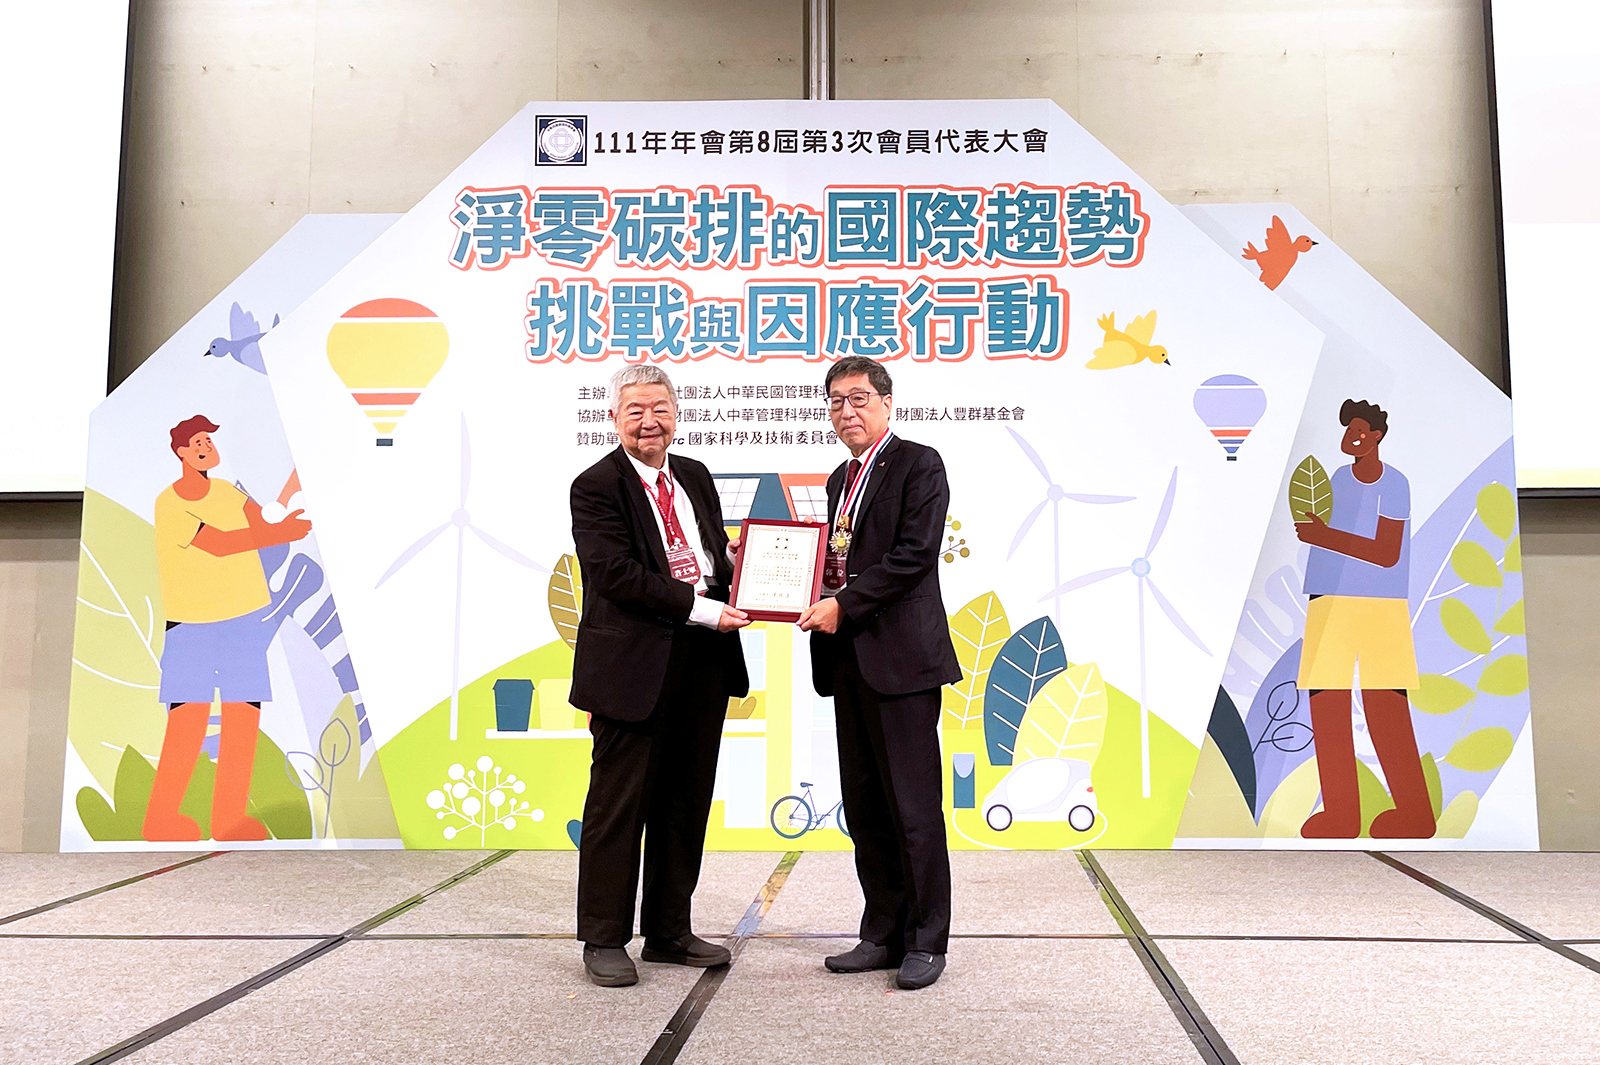 President Kuo travelled to Taipei to receive this award in person earlier. 